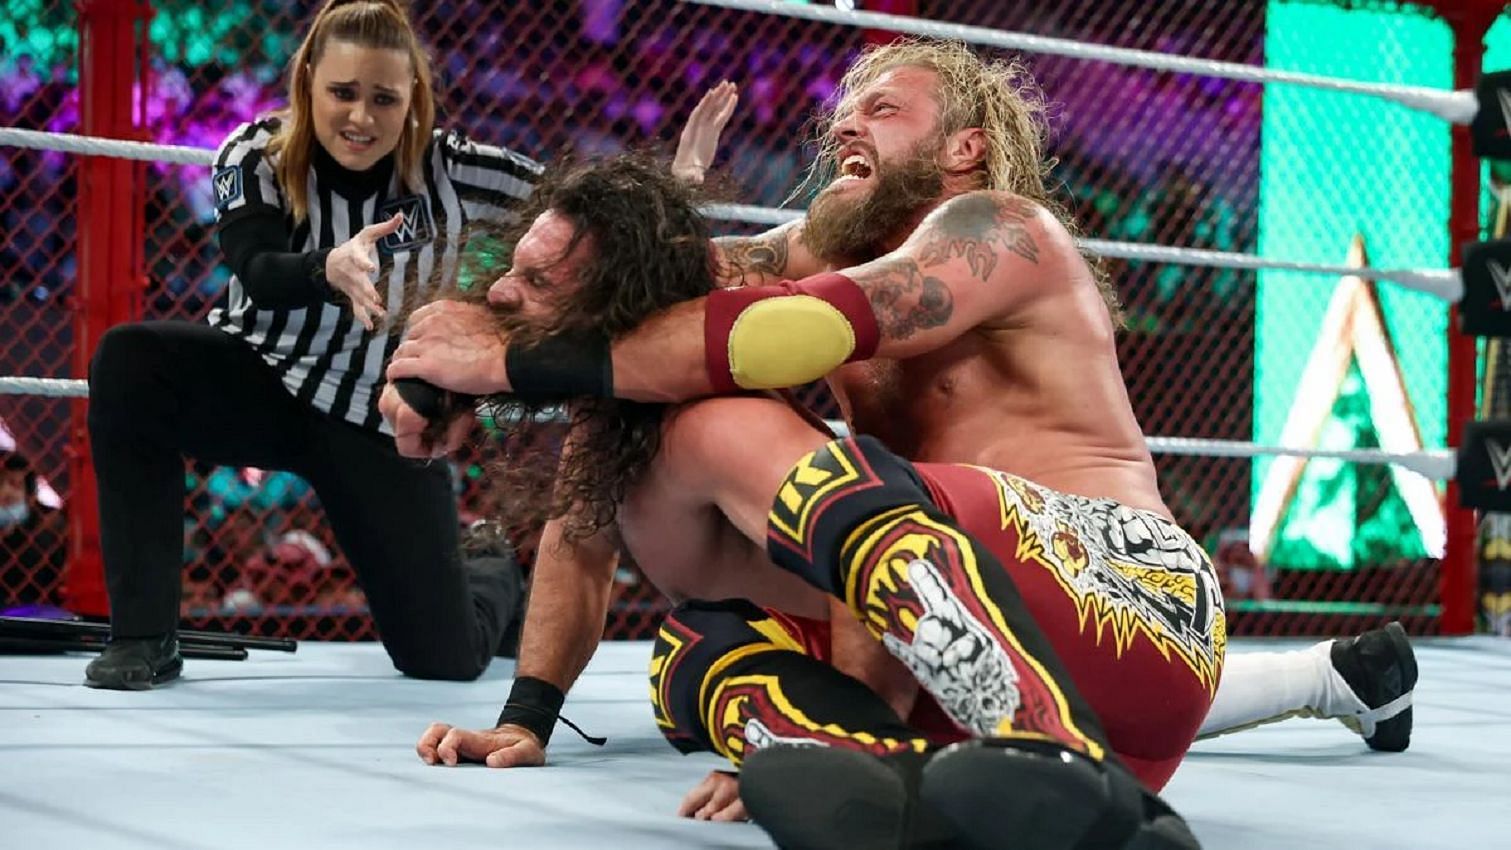 Edge and Seth Rollins had one of the most memorable matches of the Saudi shows